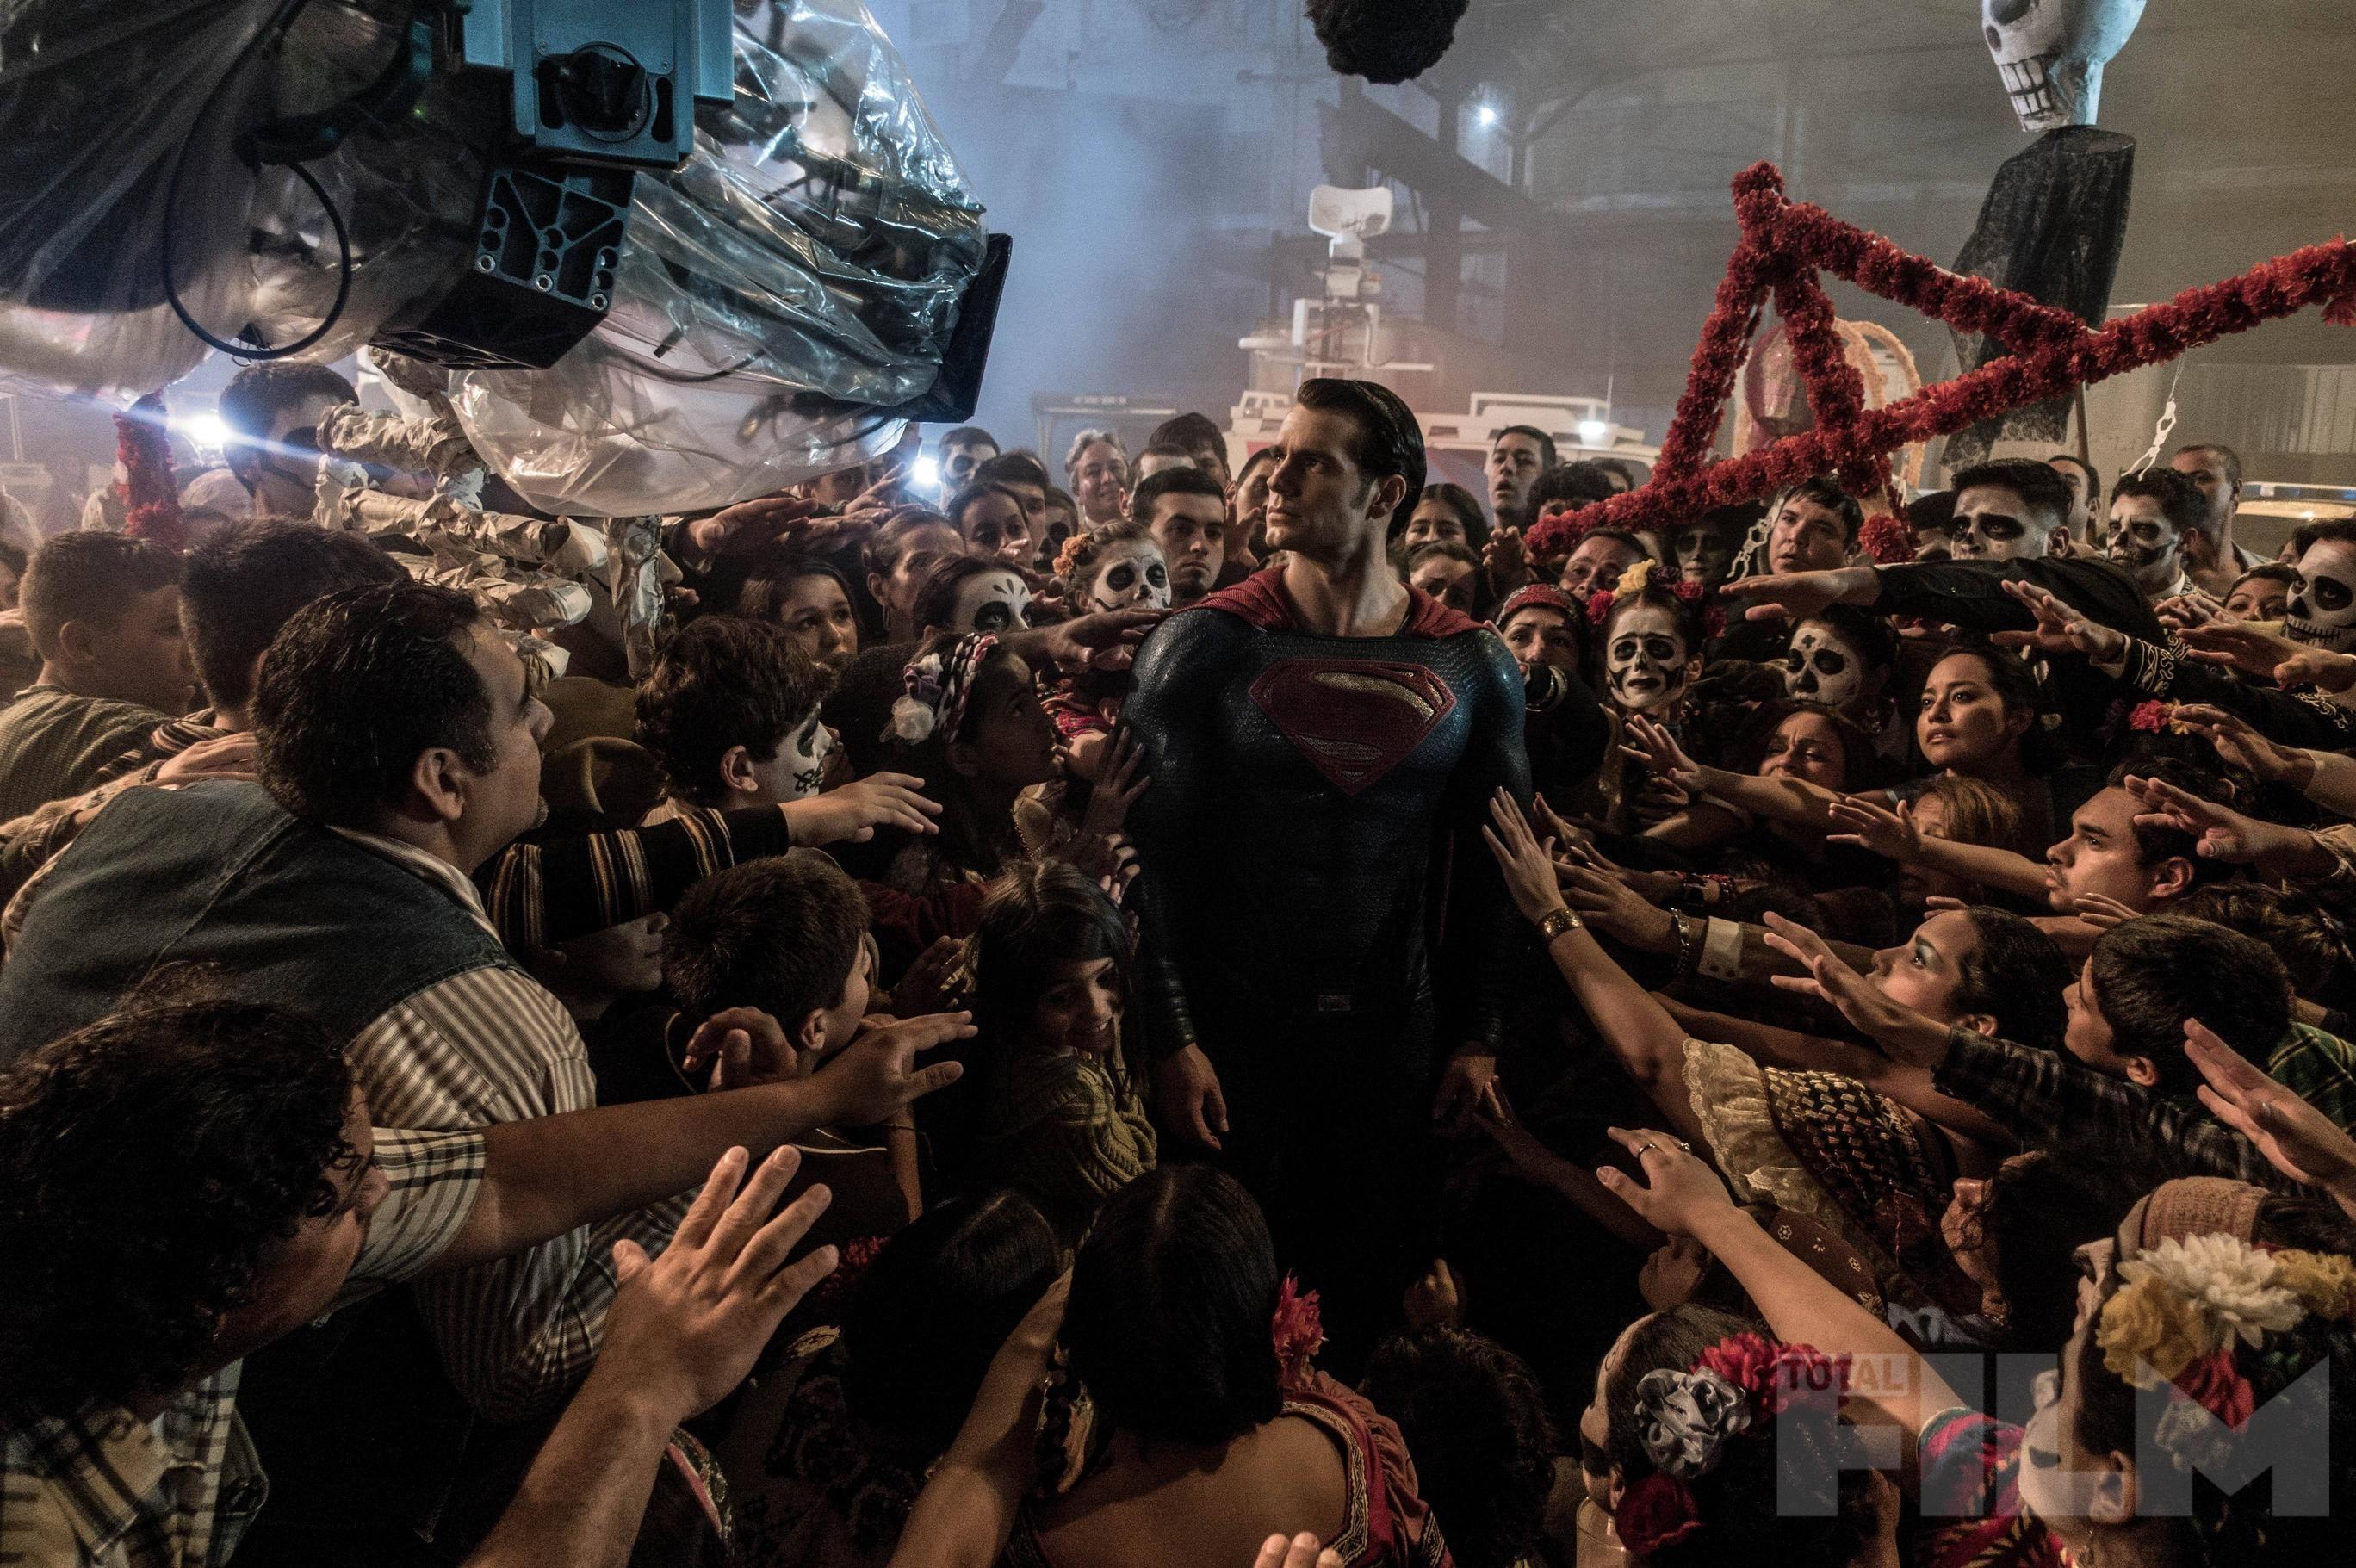 Batman V Superman: Dawn of Justice 340572 Gallery, Image, Posters